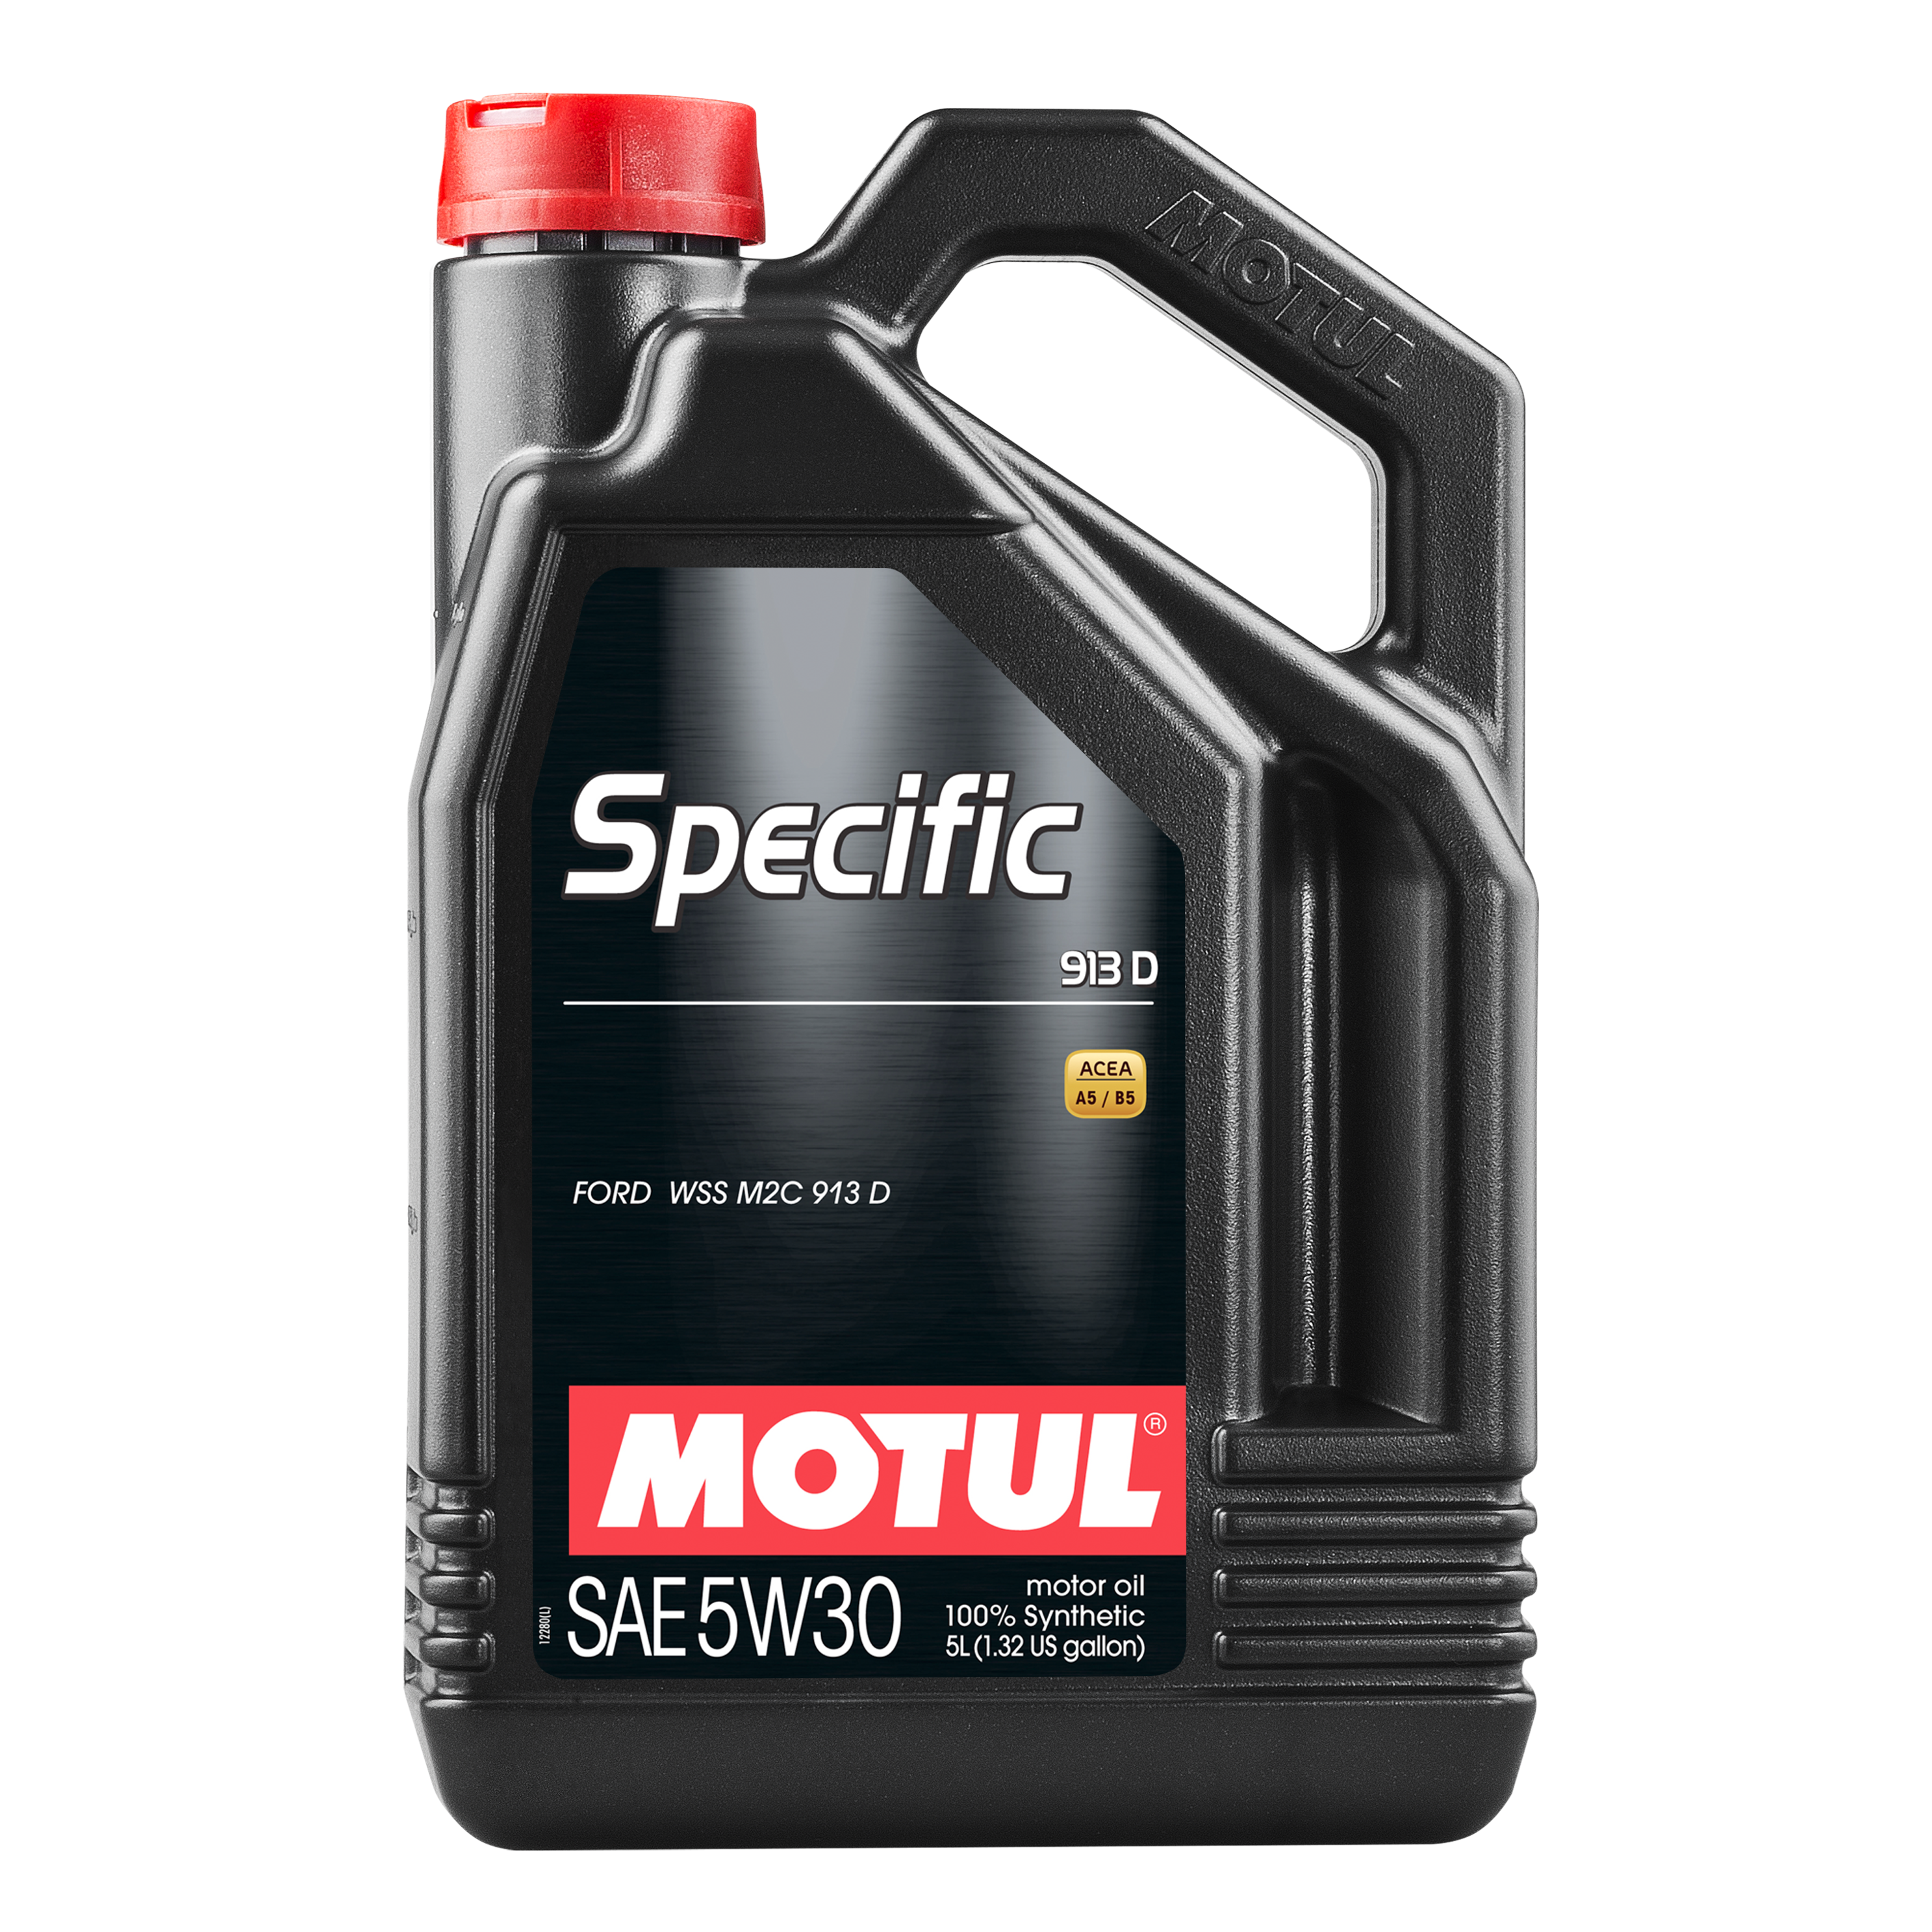 Масло моторное Motul Specific 913C/D Ford 5W30